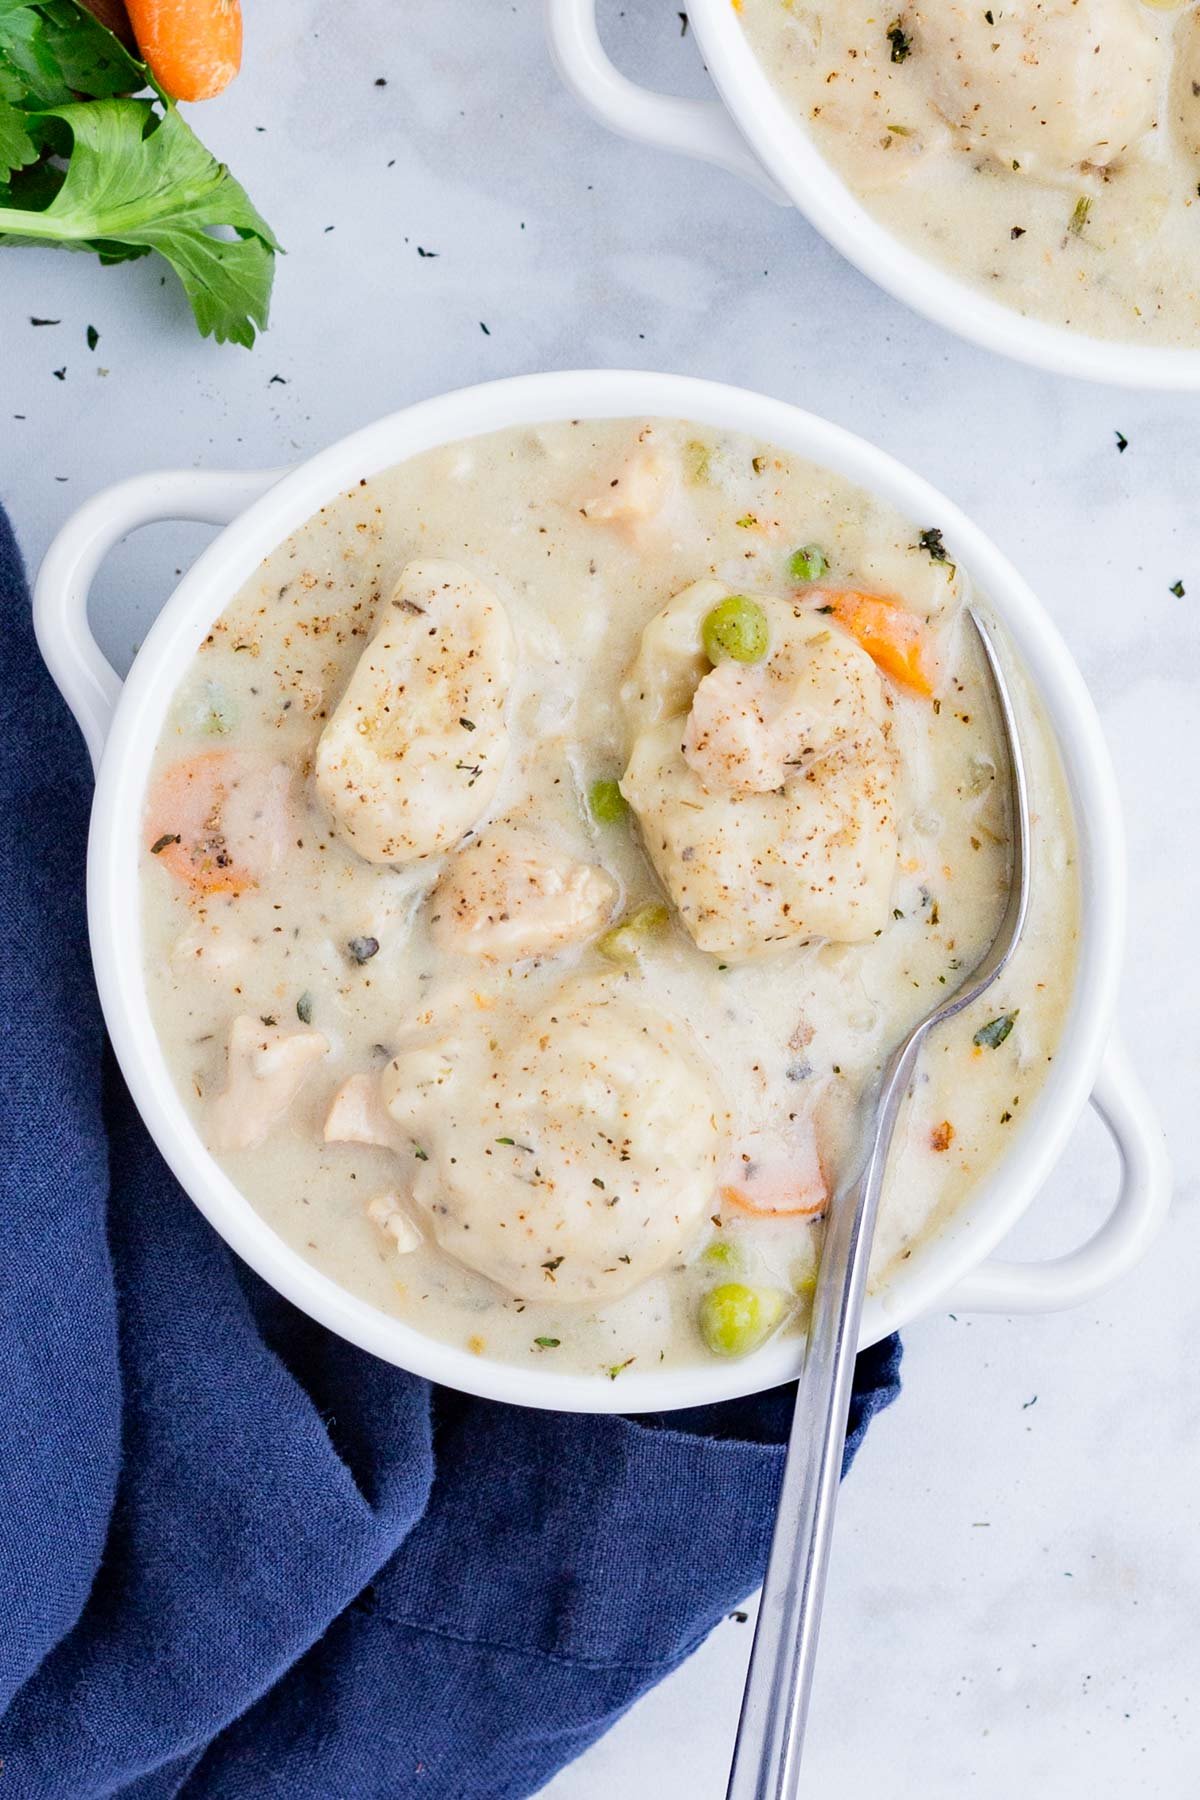 The Best Chicken Dumpling Soup RECIPE served in a white soup bowl and a metal spoon.